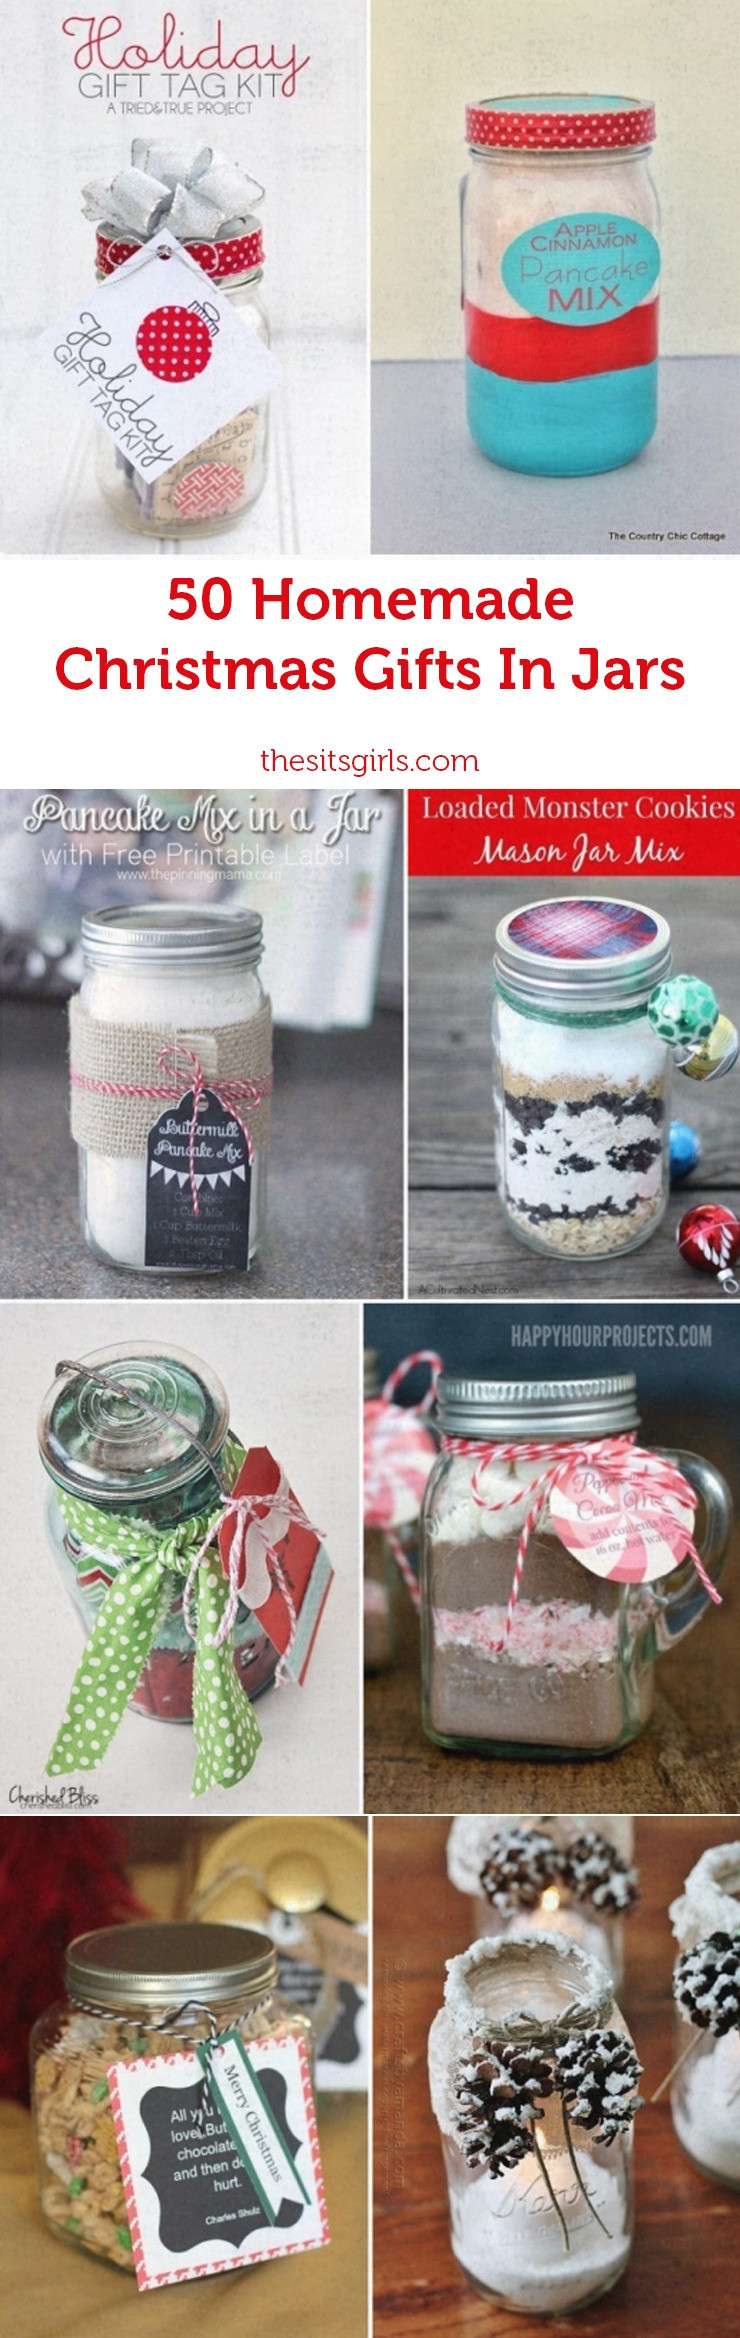 DIY Christmas Gifts For Girls
 Gifts In Jars